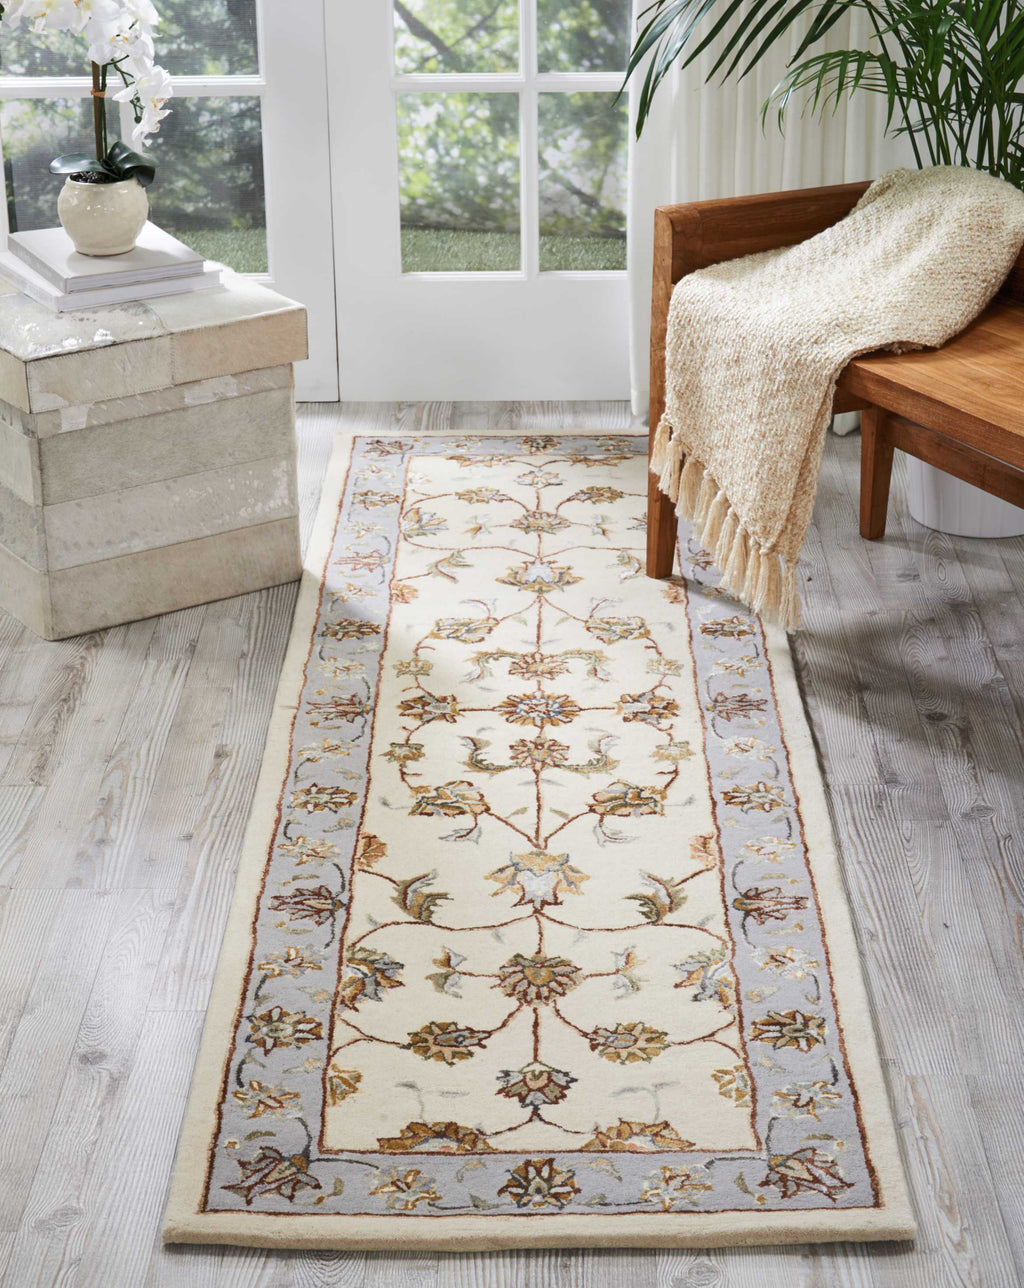 Nourison Serenade SRD01 Ivory/Grey Area Rug by Michael Amini Room Image Feature